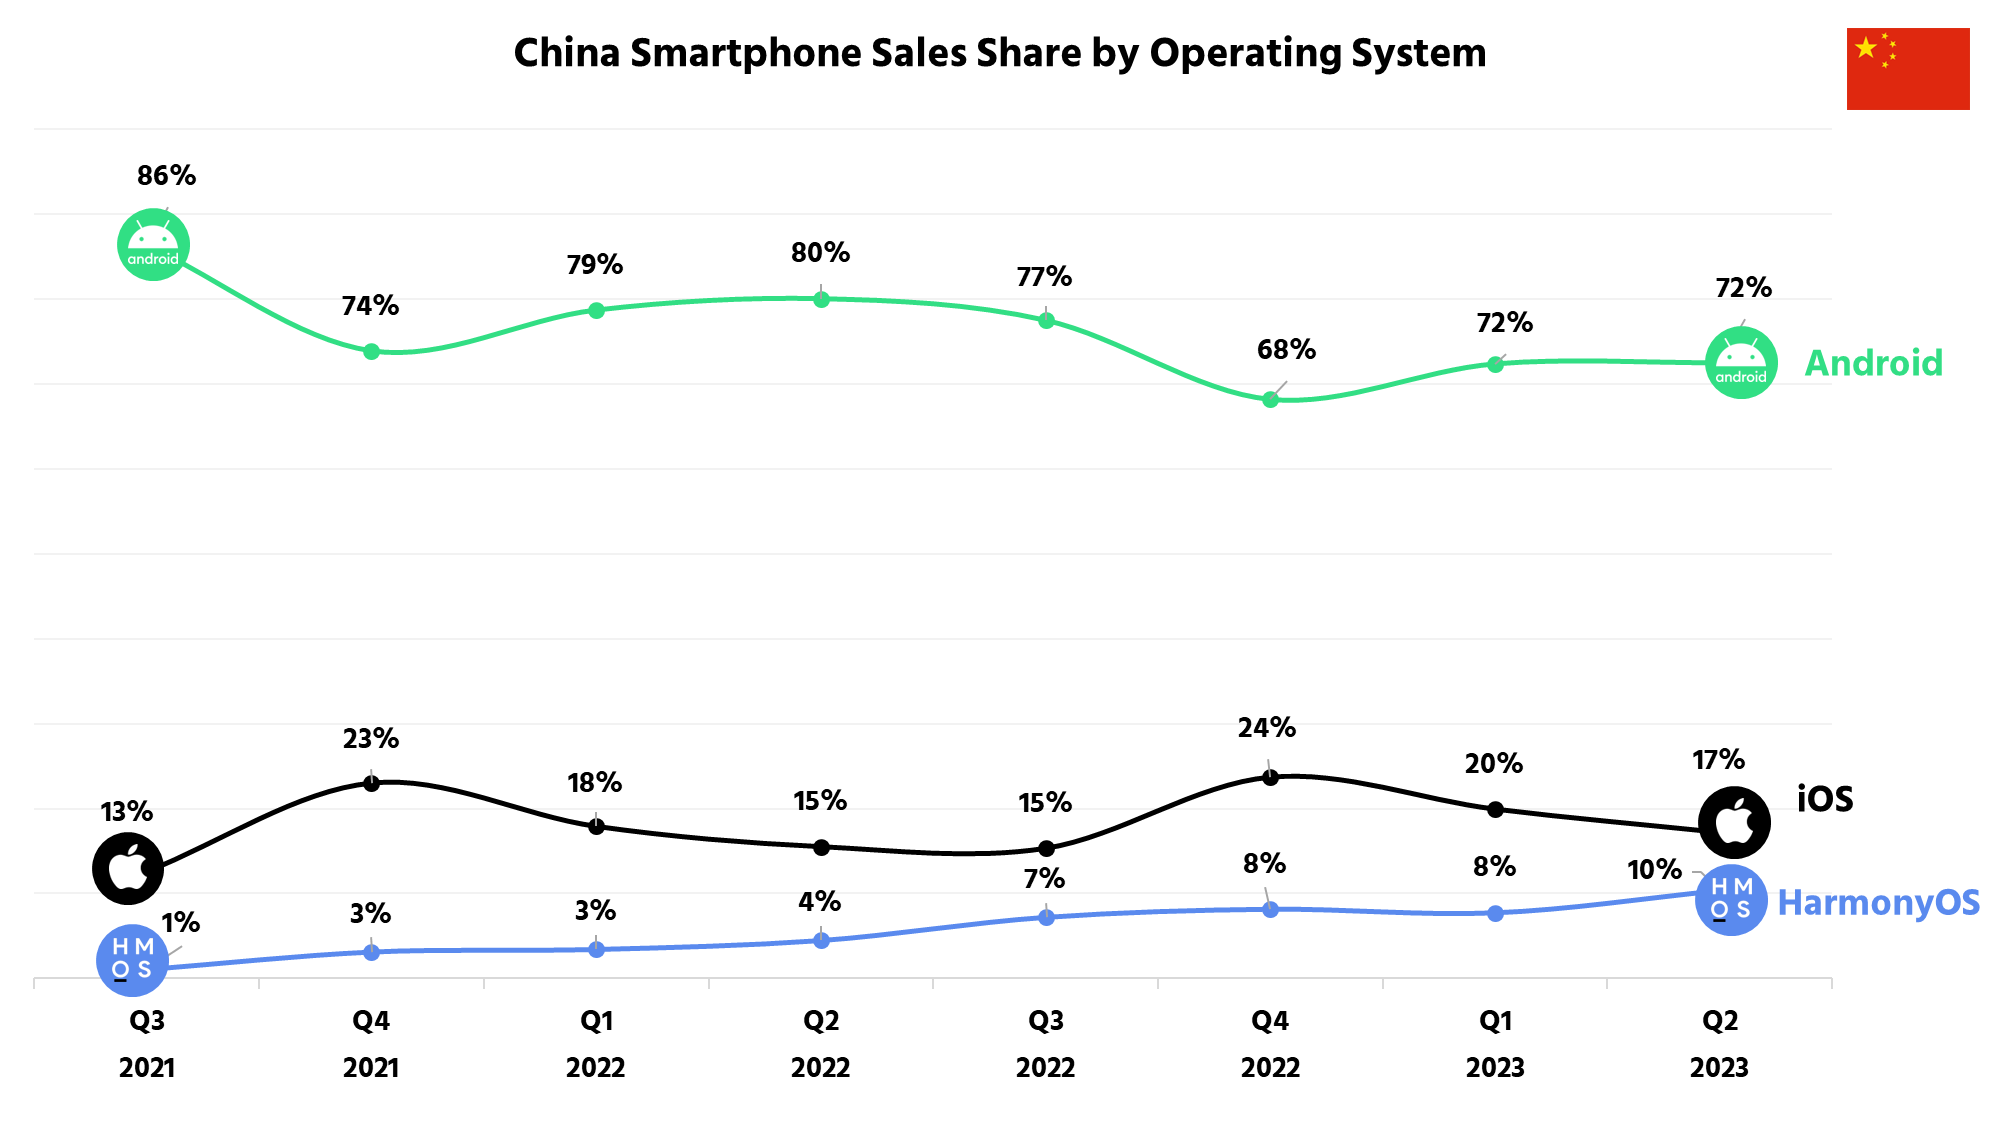 A chart showing the smartphone OS sales share in Q2 2023 for China